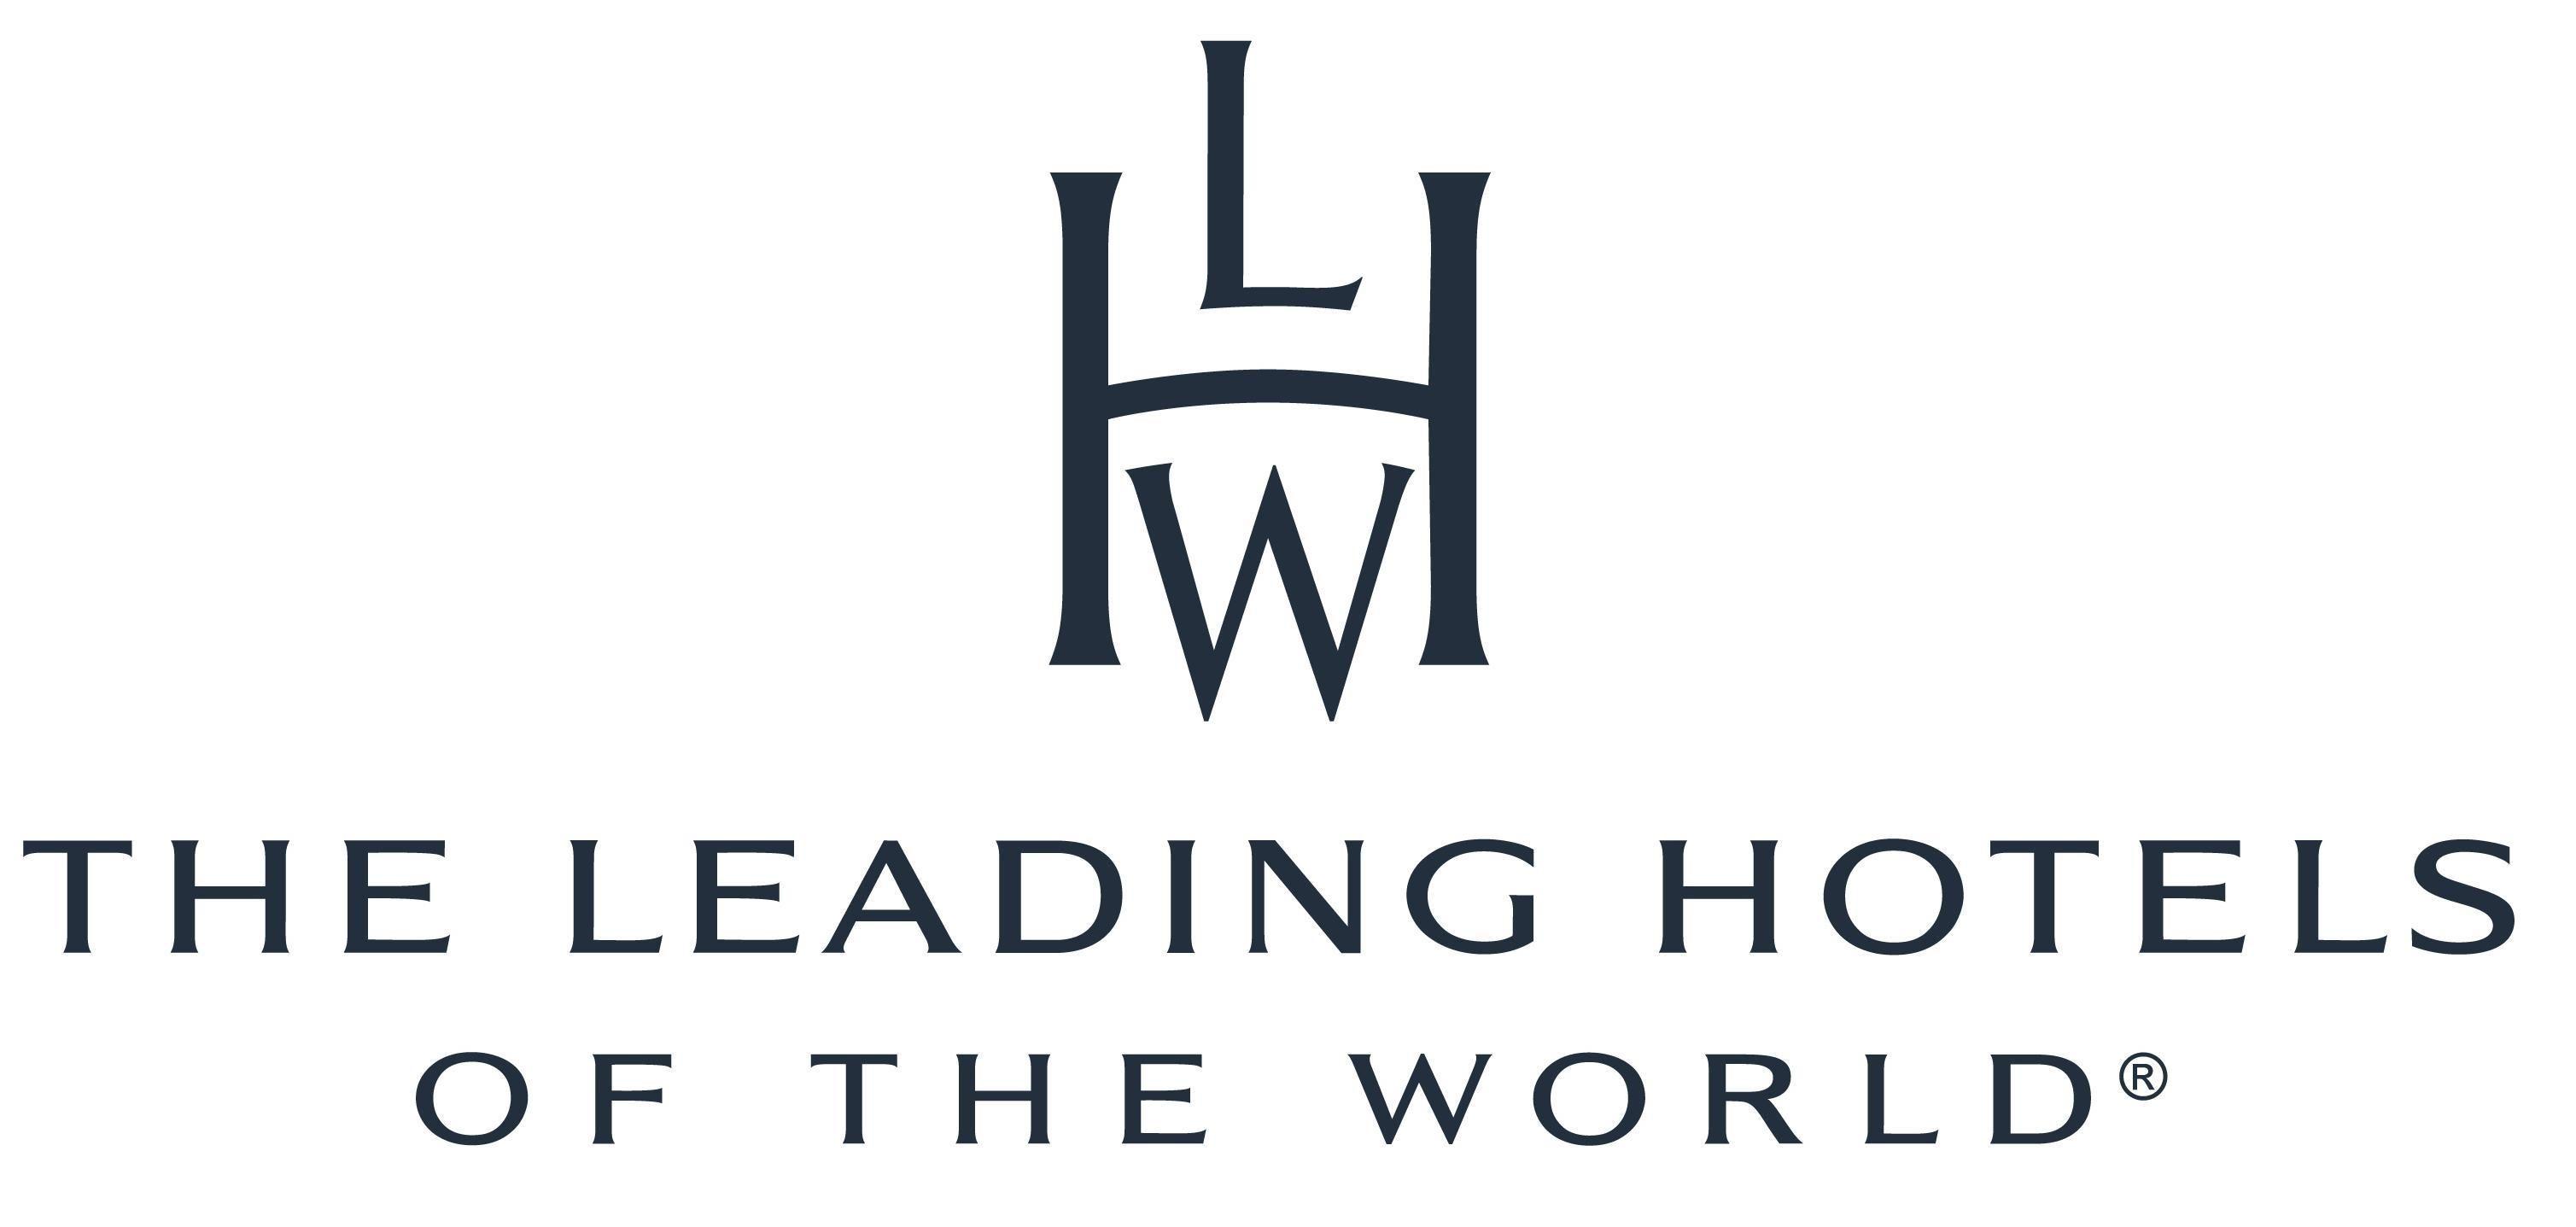 Leading Hotel Logo - The Leading Hotels Competitors, Revenue and Employees